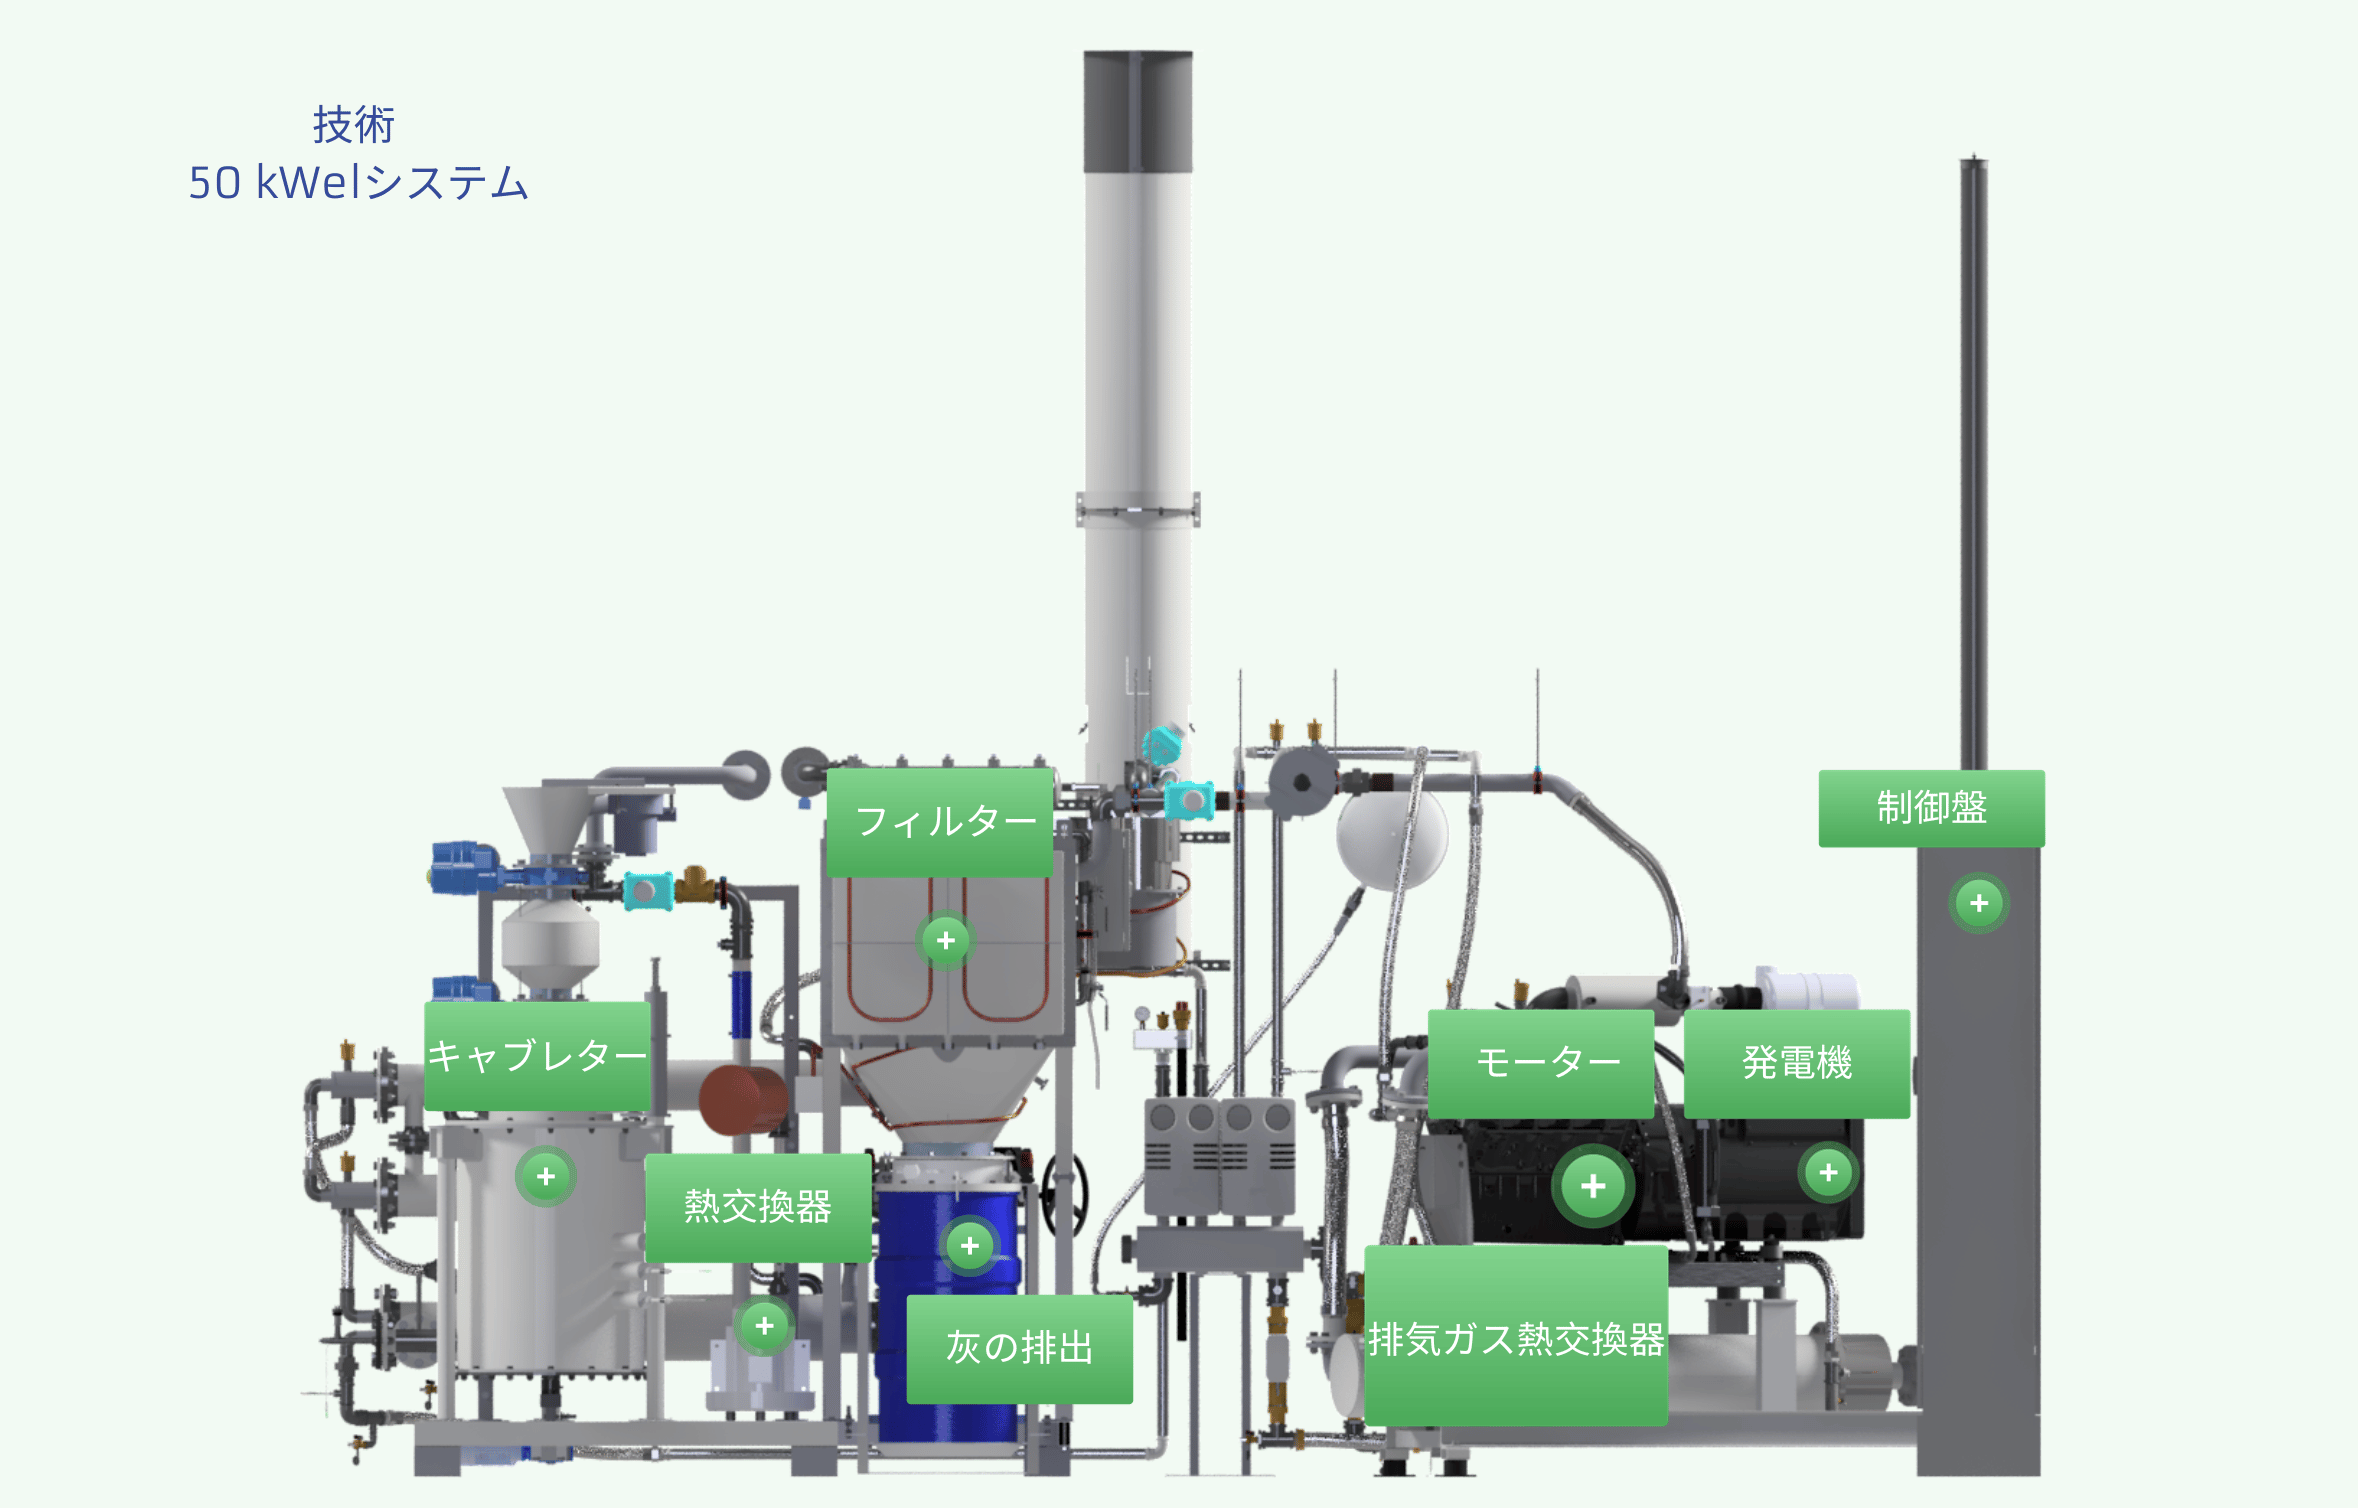 Technology of the 50 kWel Plants